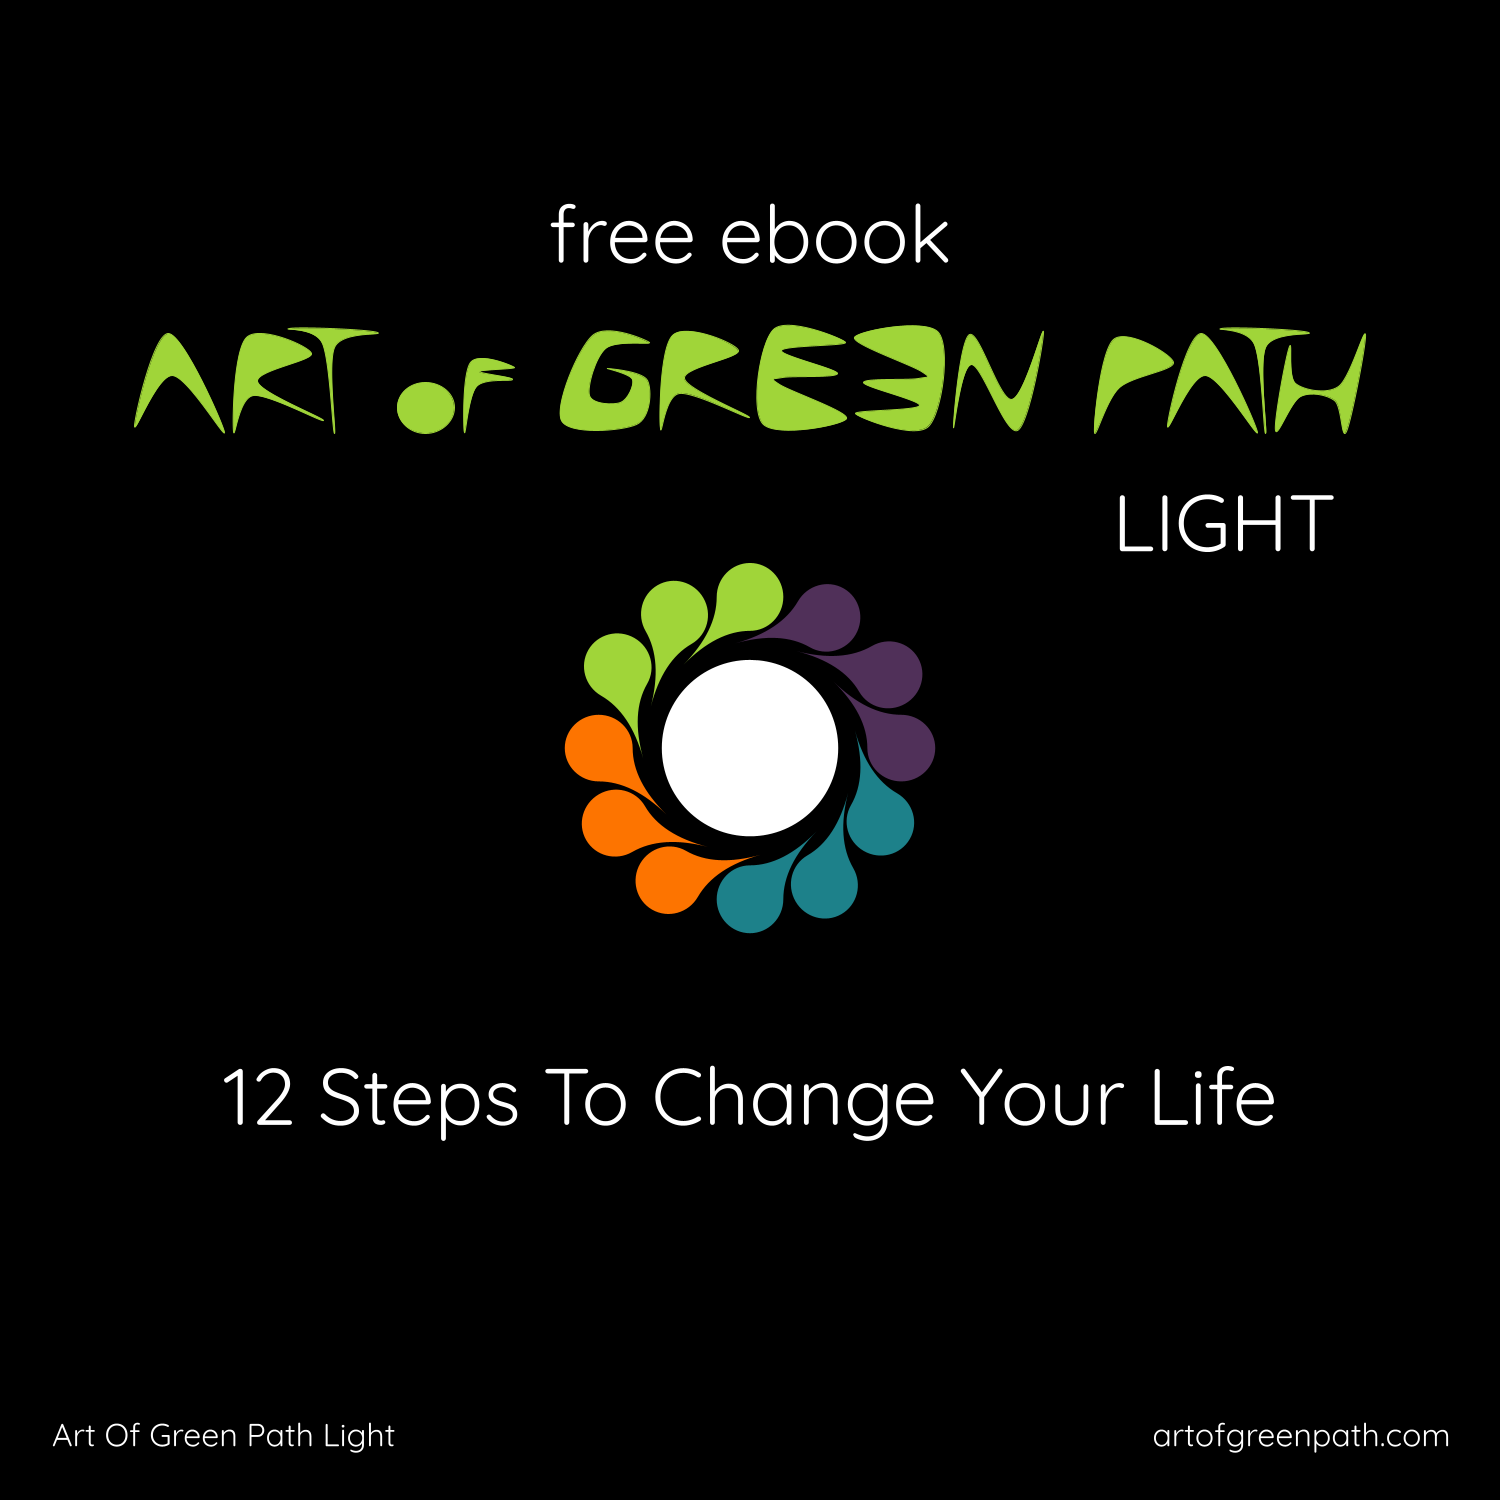 FREE EBOOK Art Of Green Path LIGHT - 12 Steps To Change Your Life